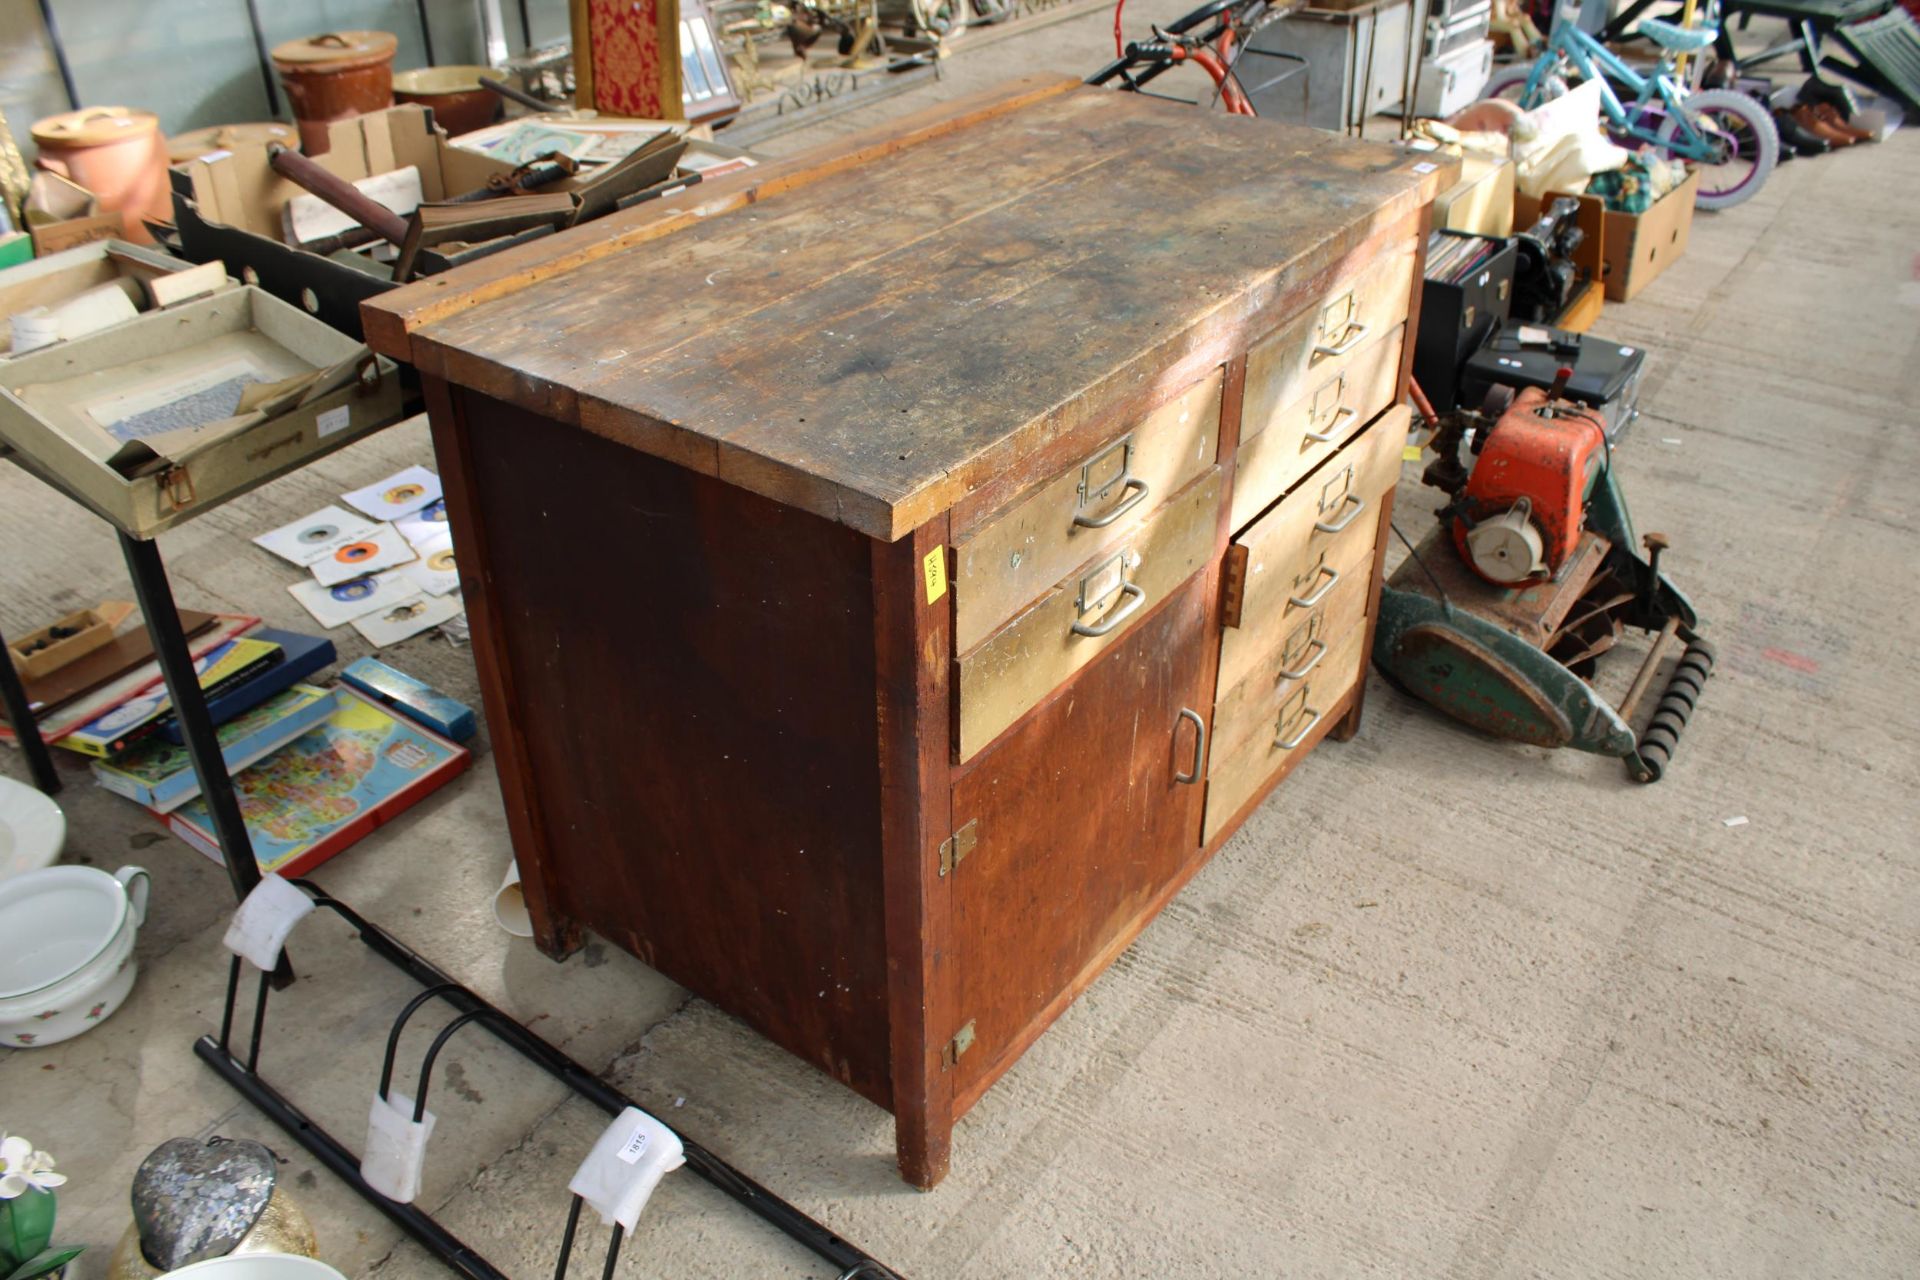 A VINTAGE WOODEN WORK BENCH WITH 8 DRAWERS AND A LOWER CUPBOARD (L:119CM) - Image 2 of 2